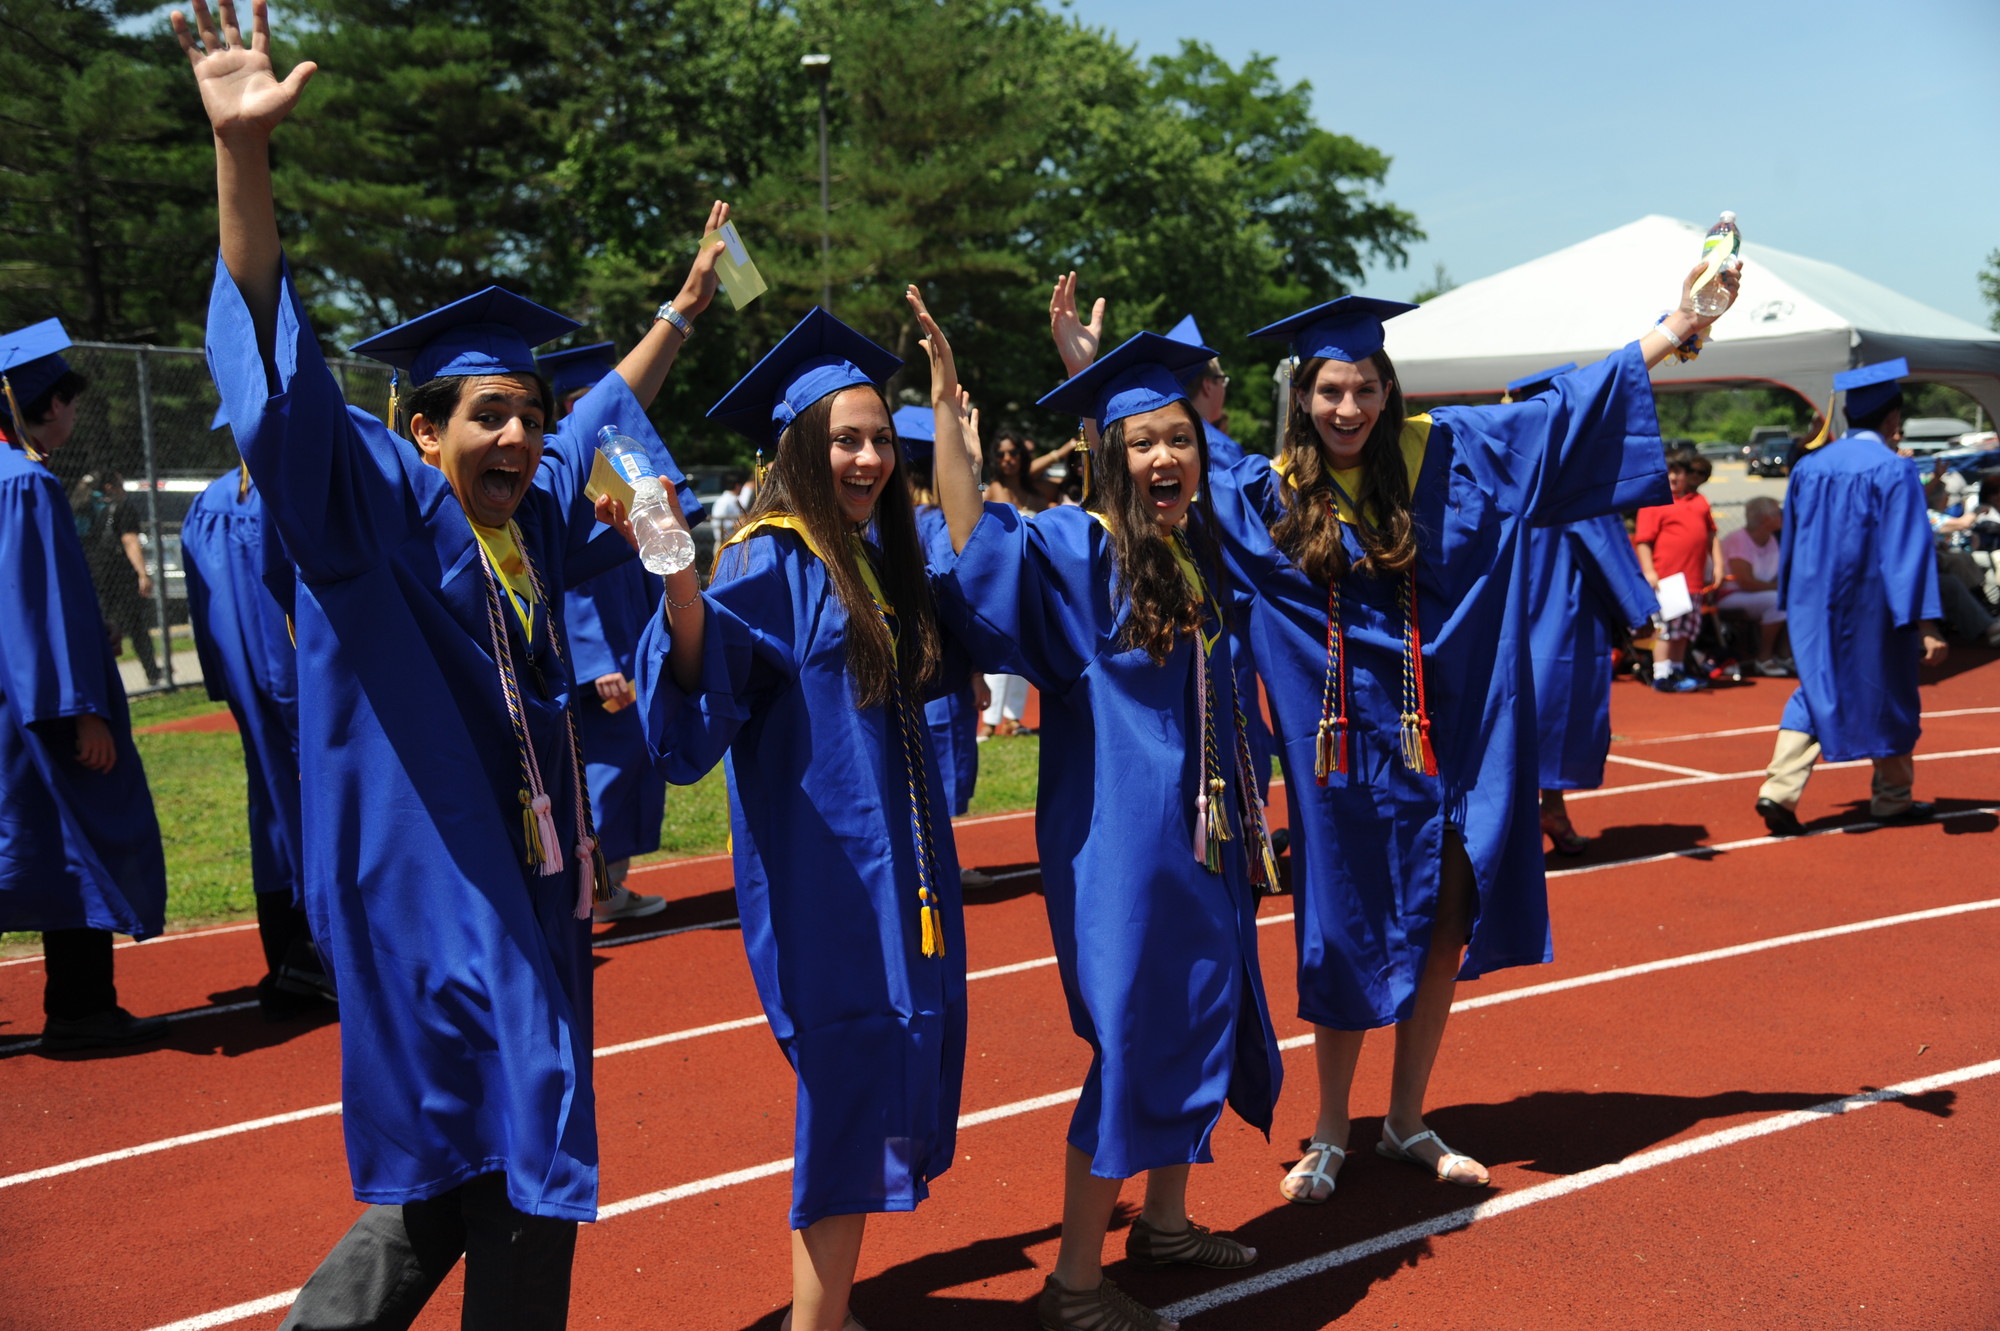 As students entered the football field to begin the graduation ceremony on Sunday, these four excited seniors expressed their excitement to be among the East Meadow High School graduating class of 2013.